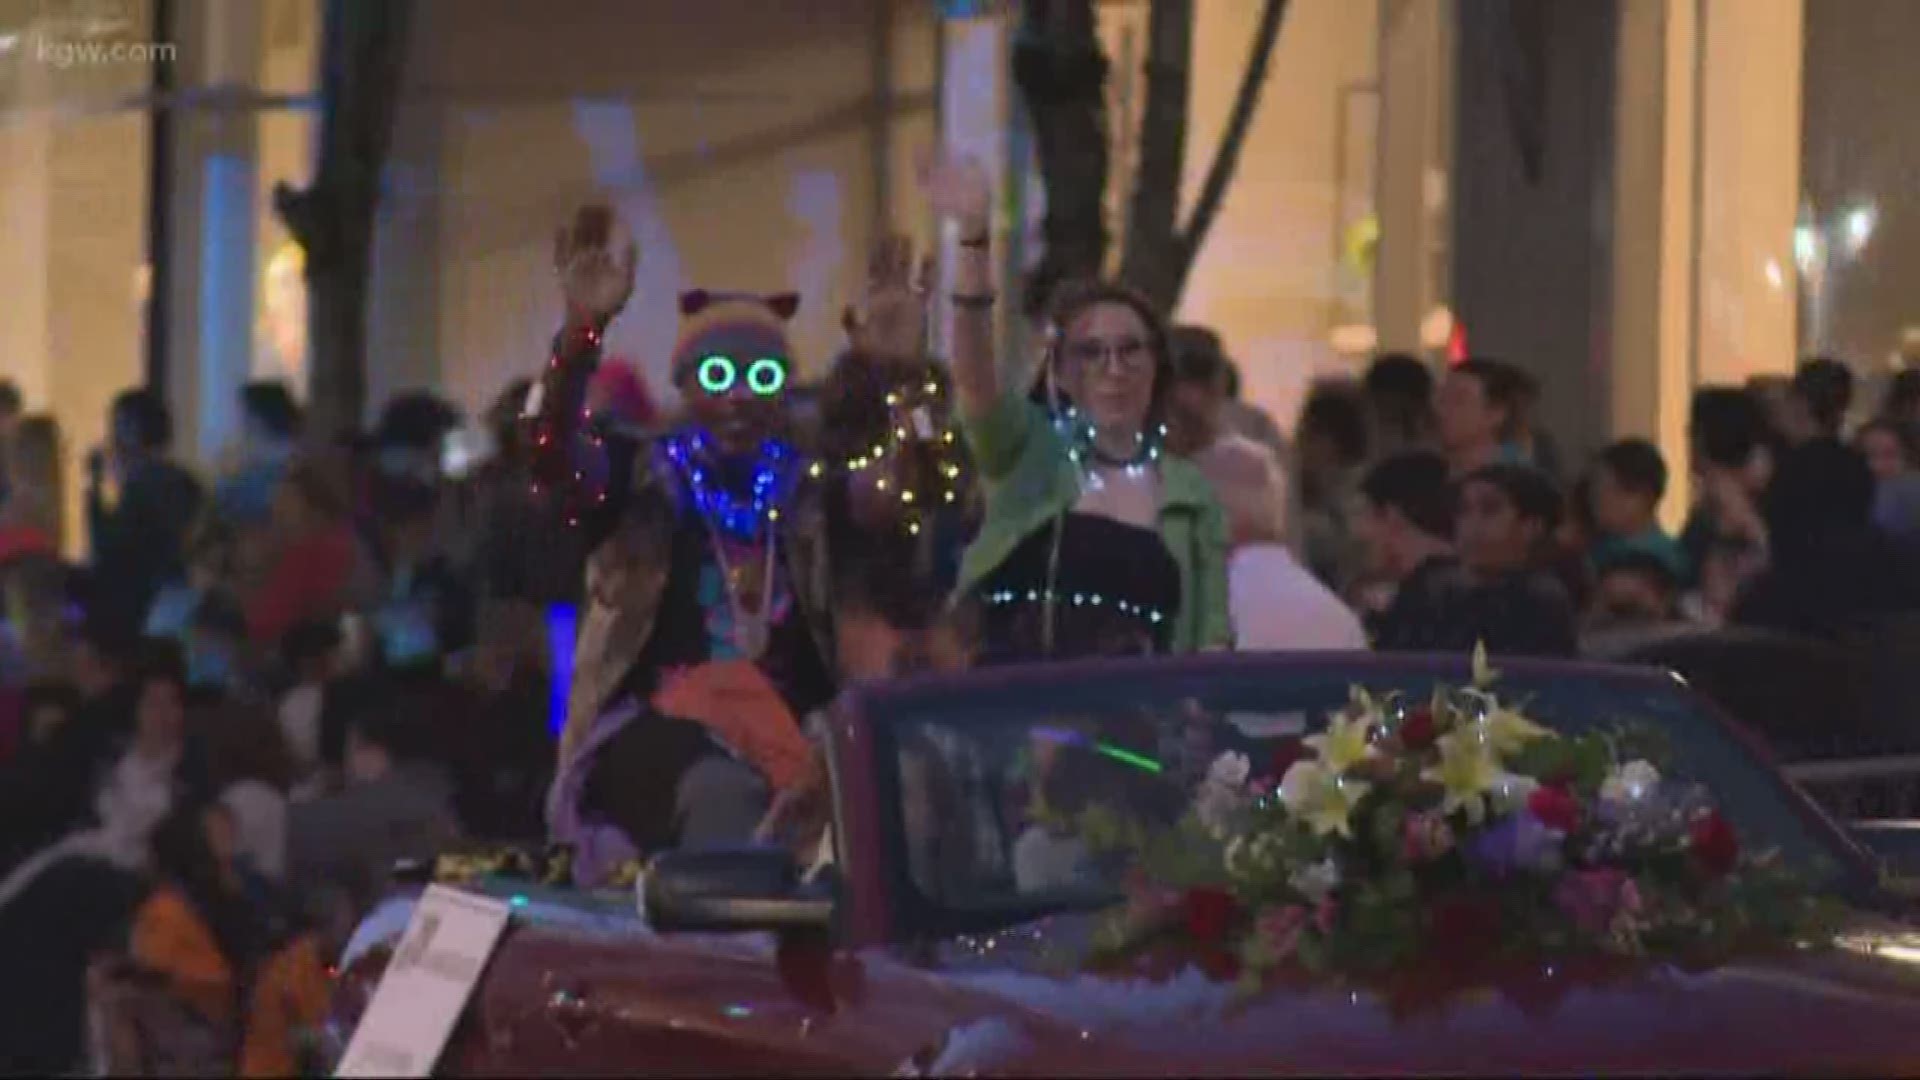 The Rose Festival’s brightest tradition returned Saturday night where more than 300,000 people lined the streets of downtown Portland for the 2019 Starlight Parade.